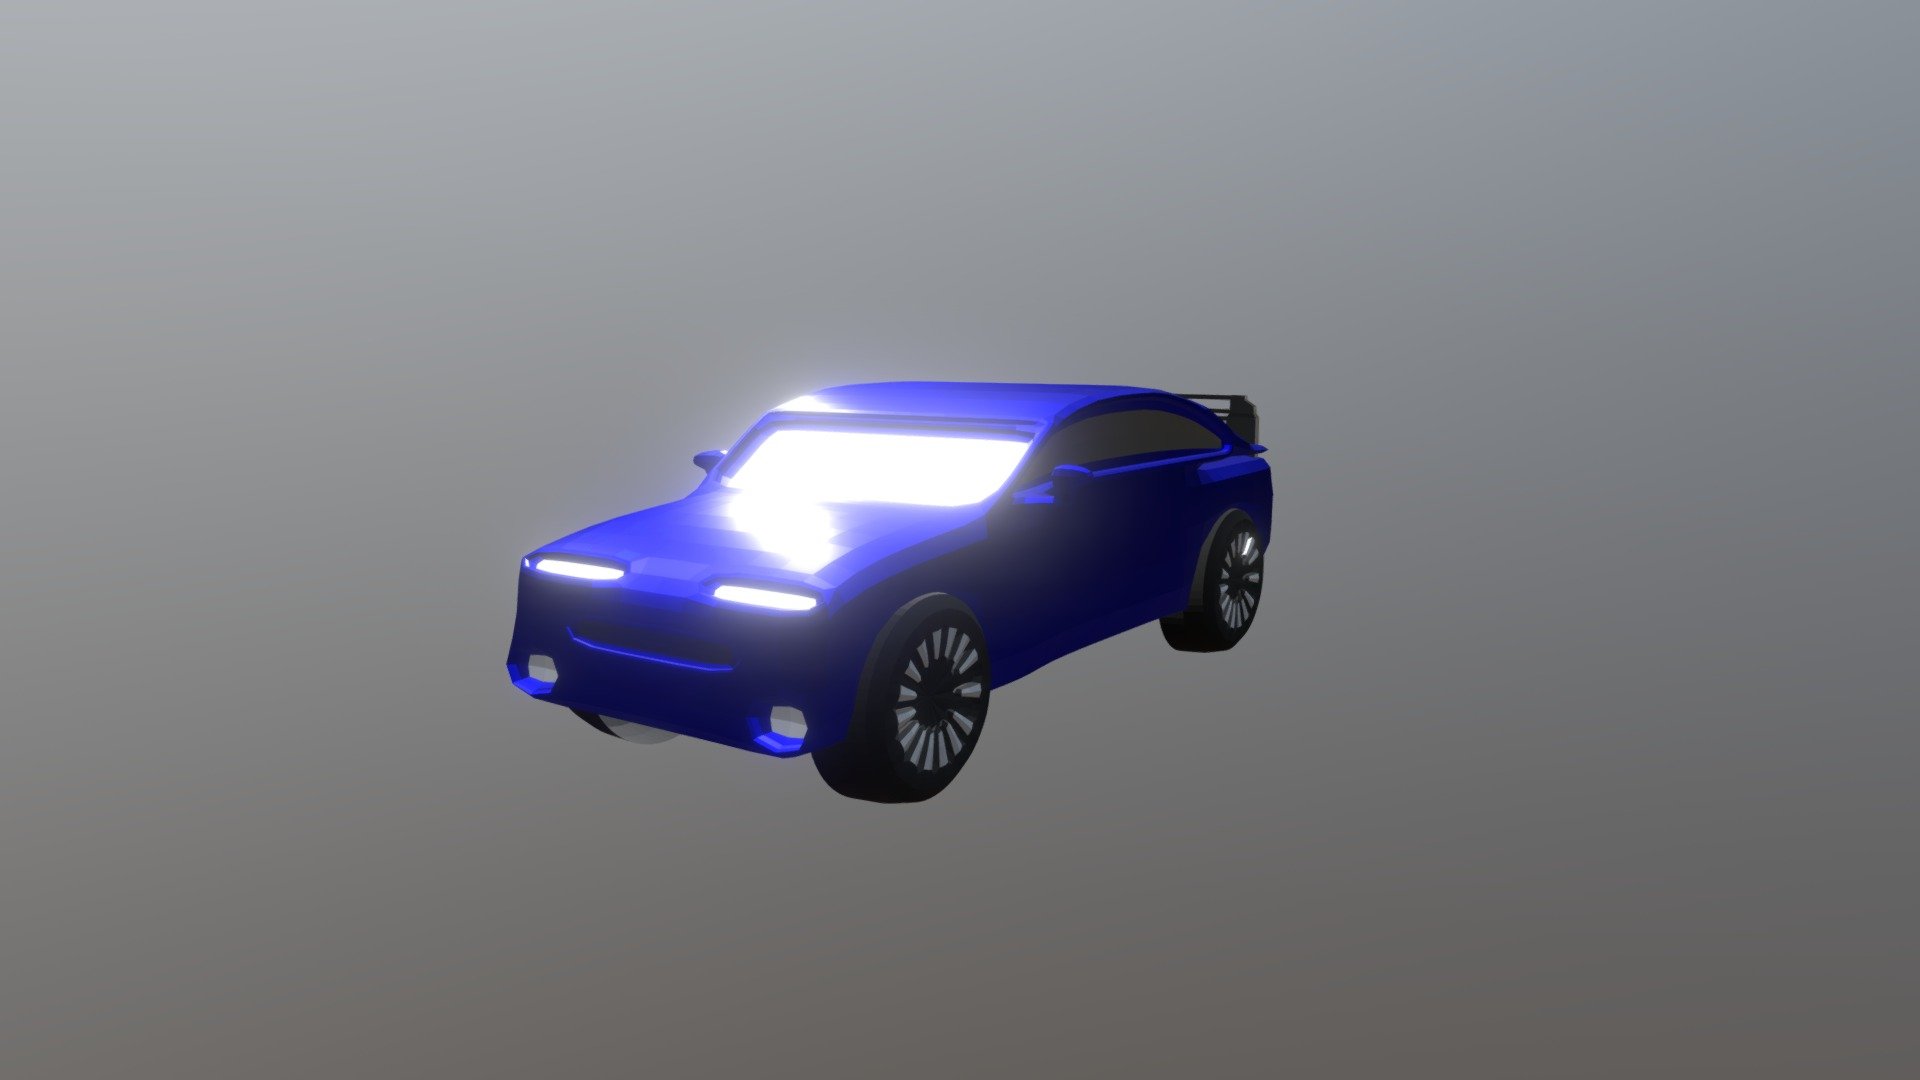 Cars For ROBLOX Game - A 3D model collection by Galaxywounds - Sketchfab